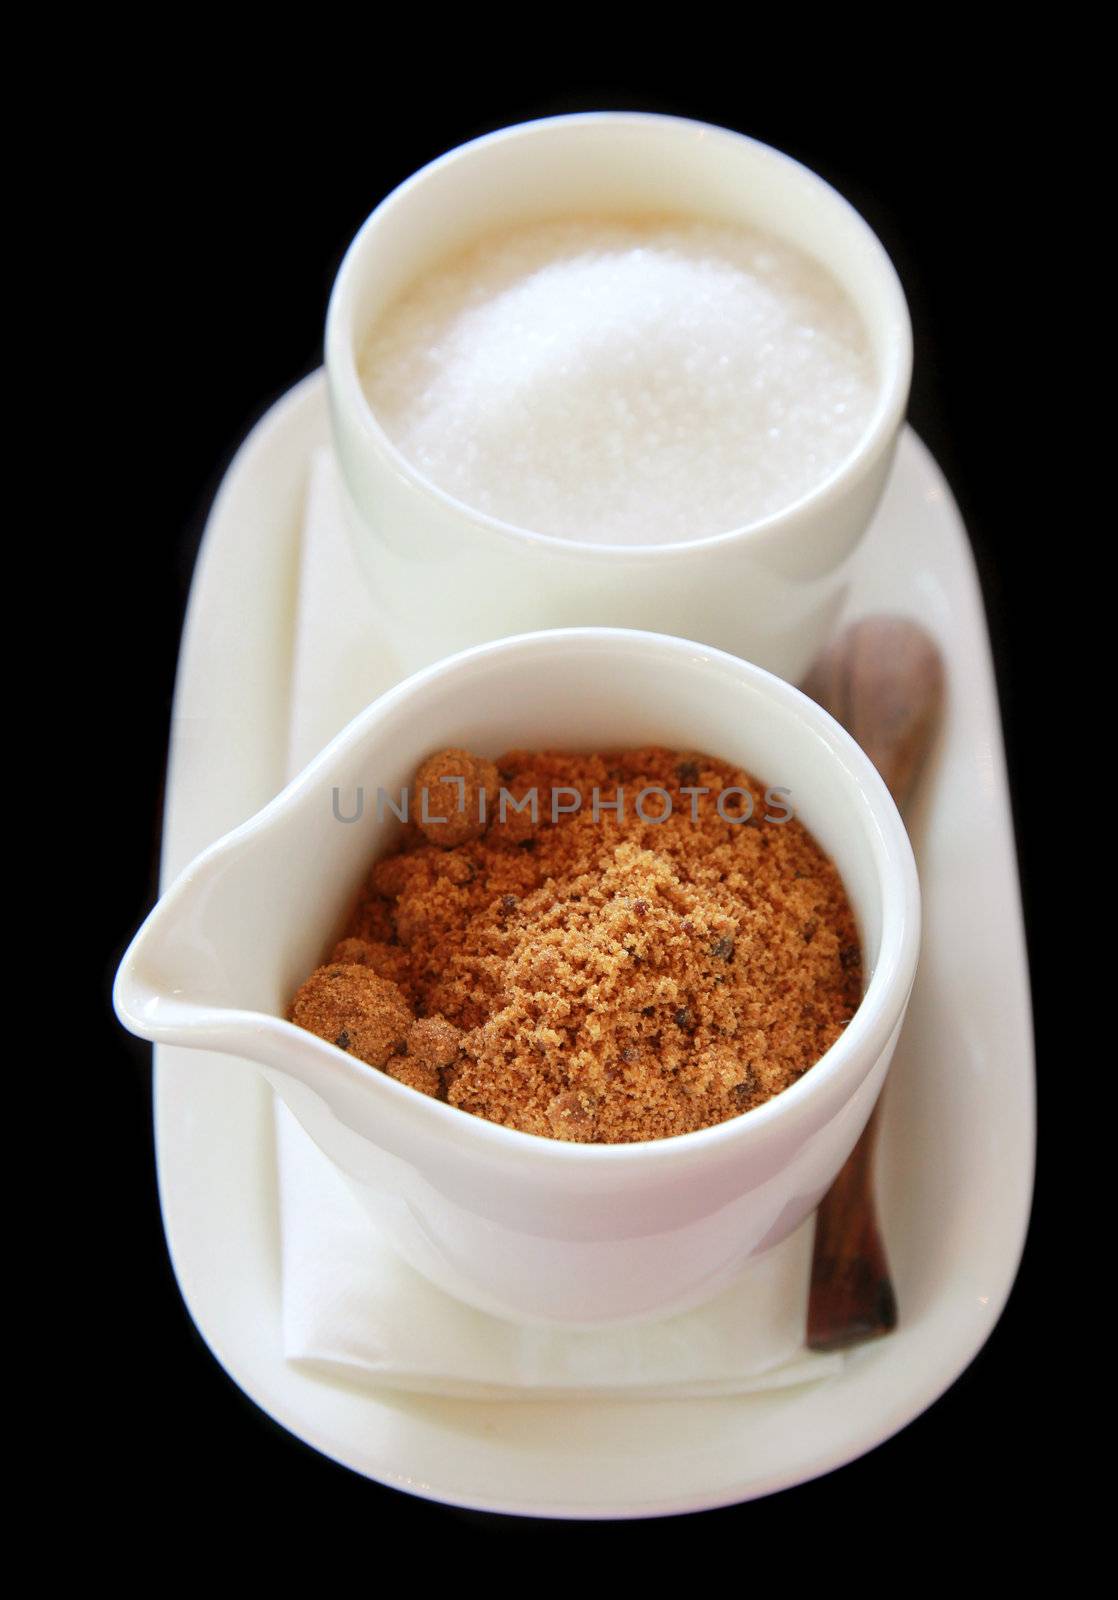 Brown and white sugar in cup with wooden spoon